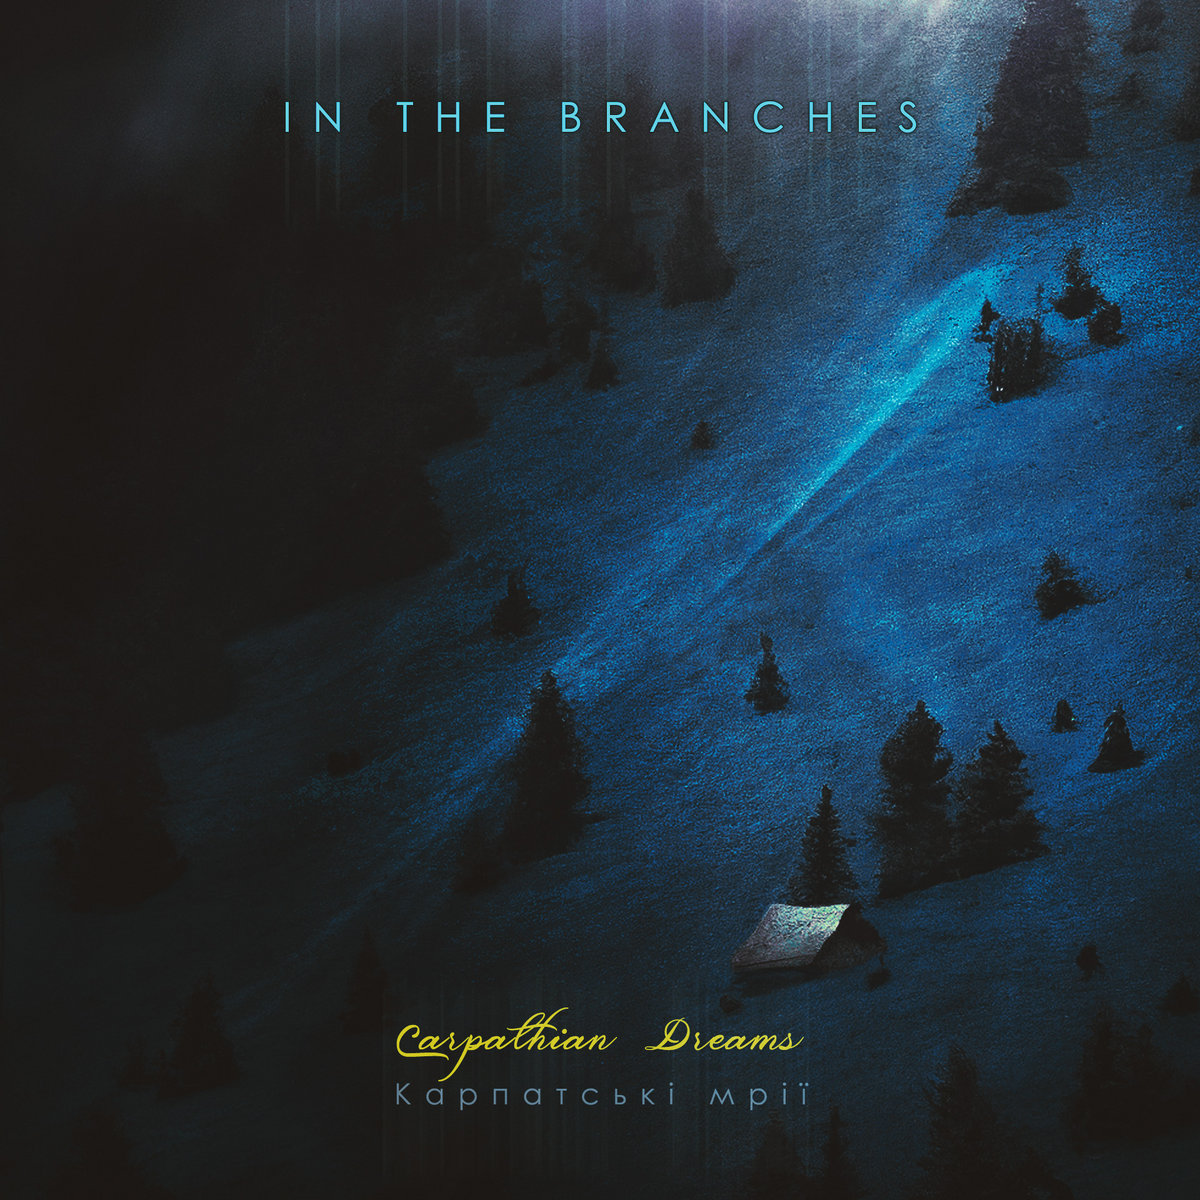 In The Branches - Carpathian Dreams